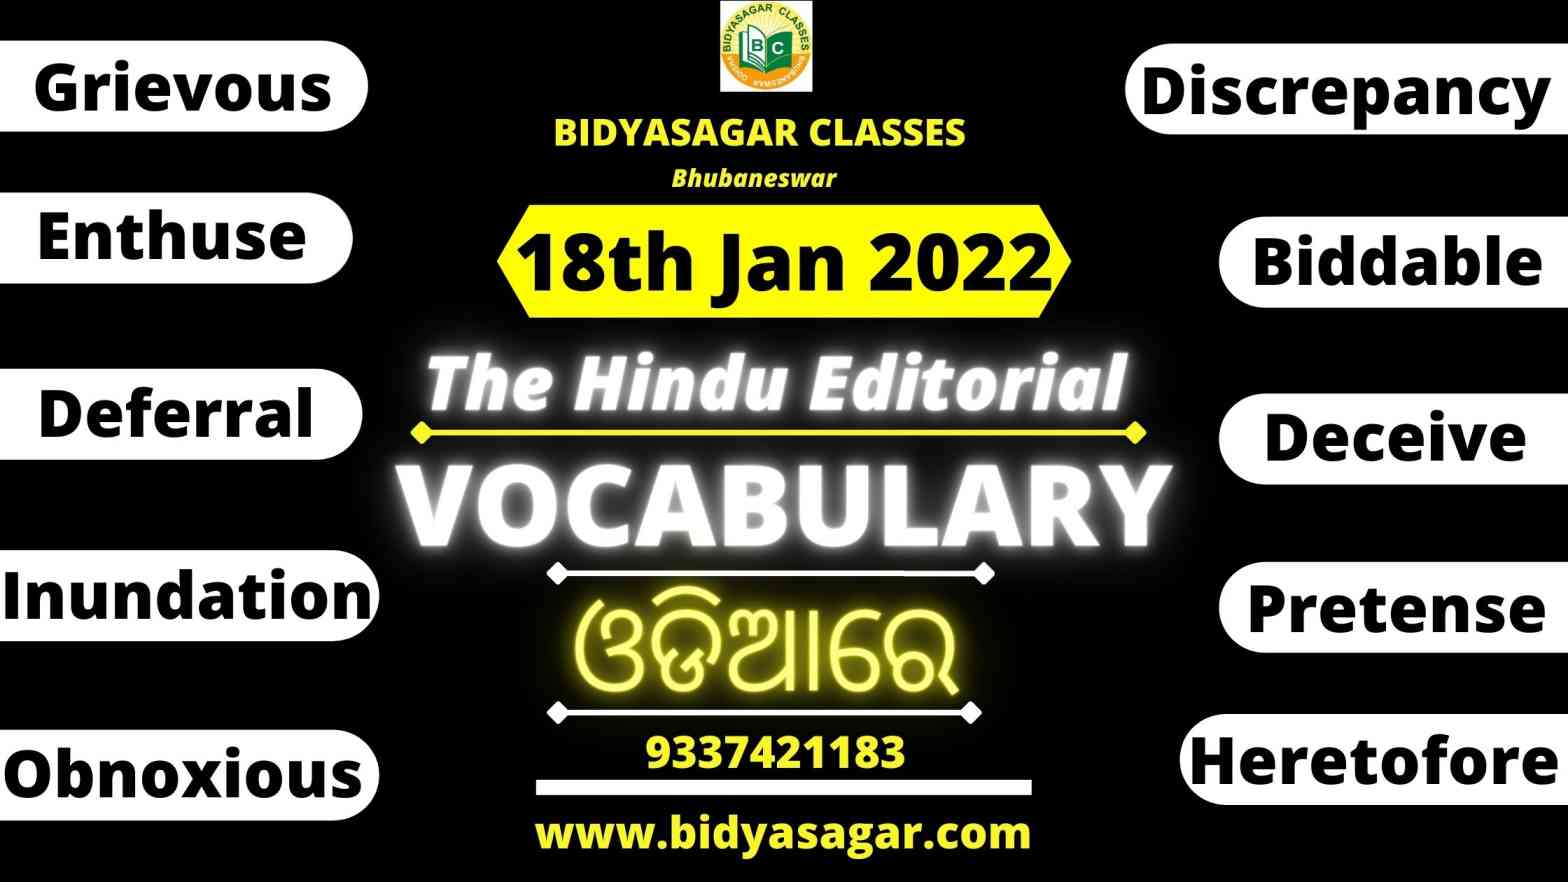 The Hindu Editorial Vocabulary of 18th January 2022